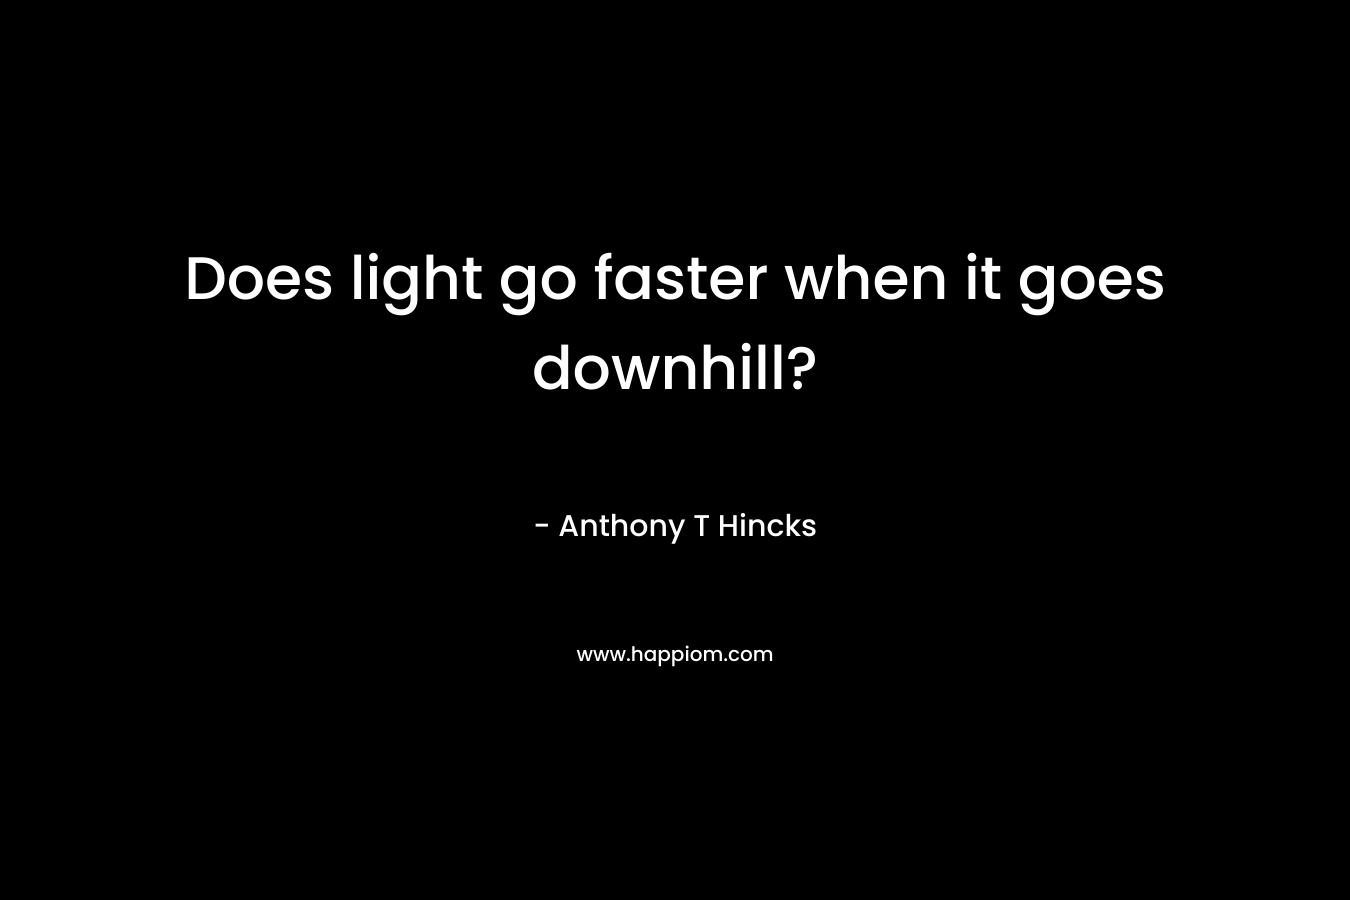 Does light go faster when it goes downhill? – Anthony T Hincks